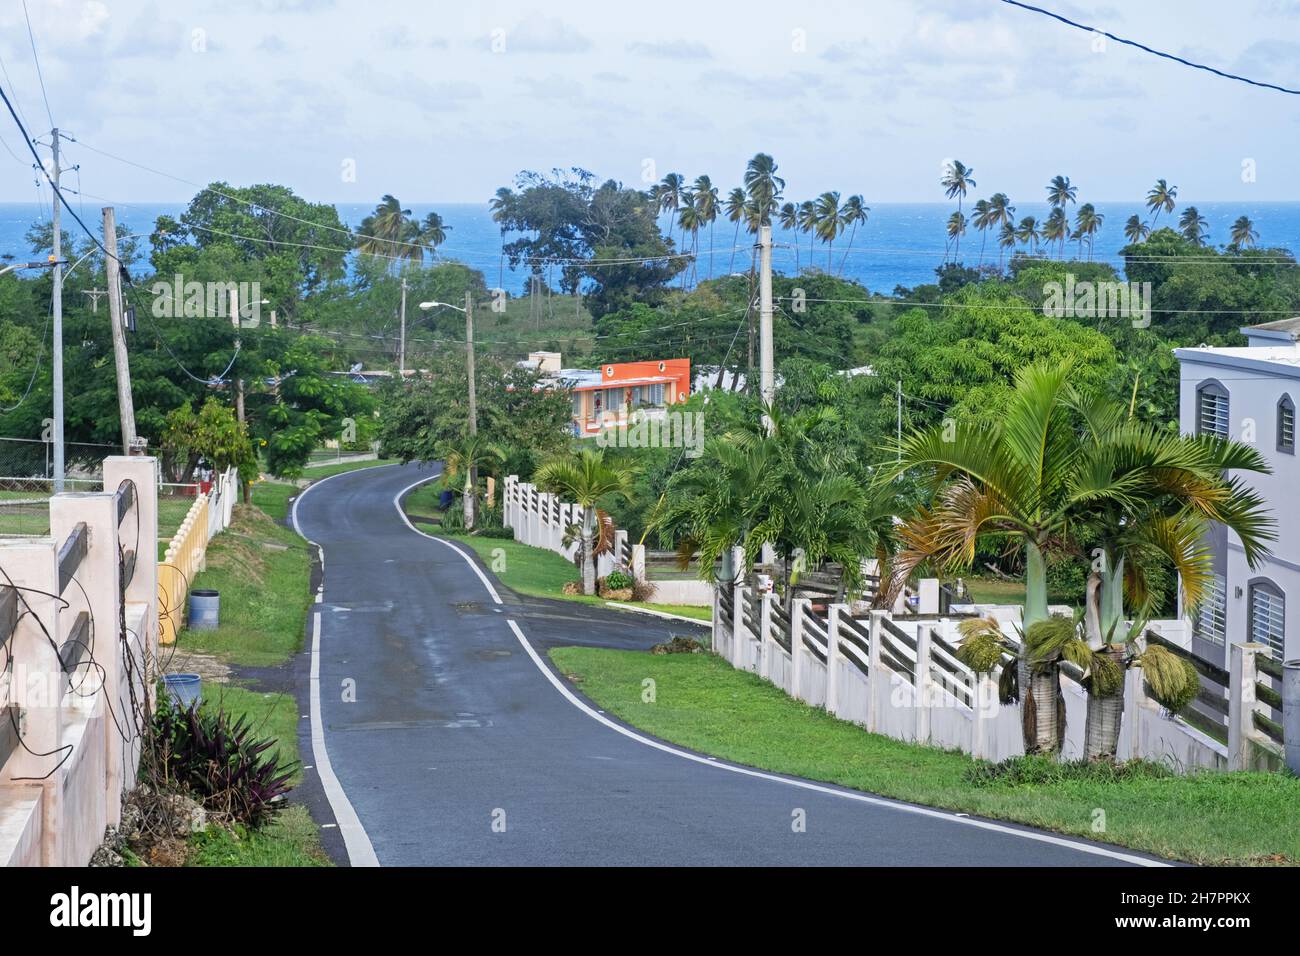 Houses in rural village along country road in northeastern Puerto Rico, Greater Antilles in the Caribbean Sea Stock Photo